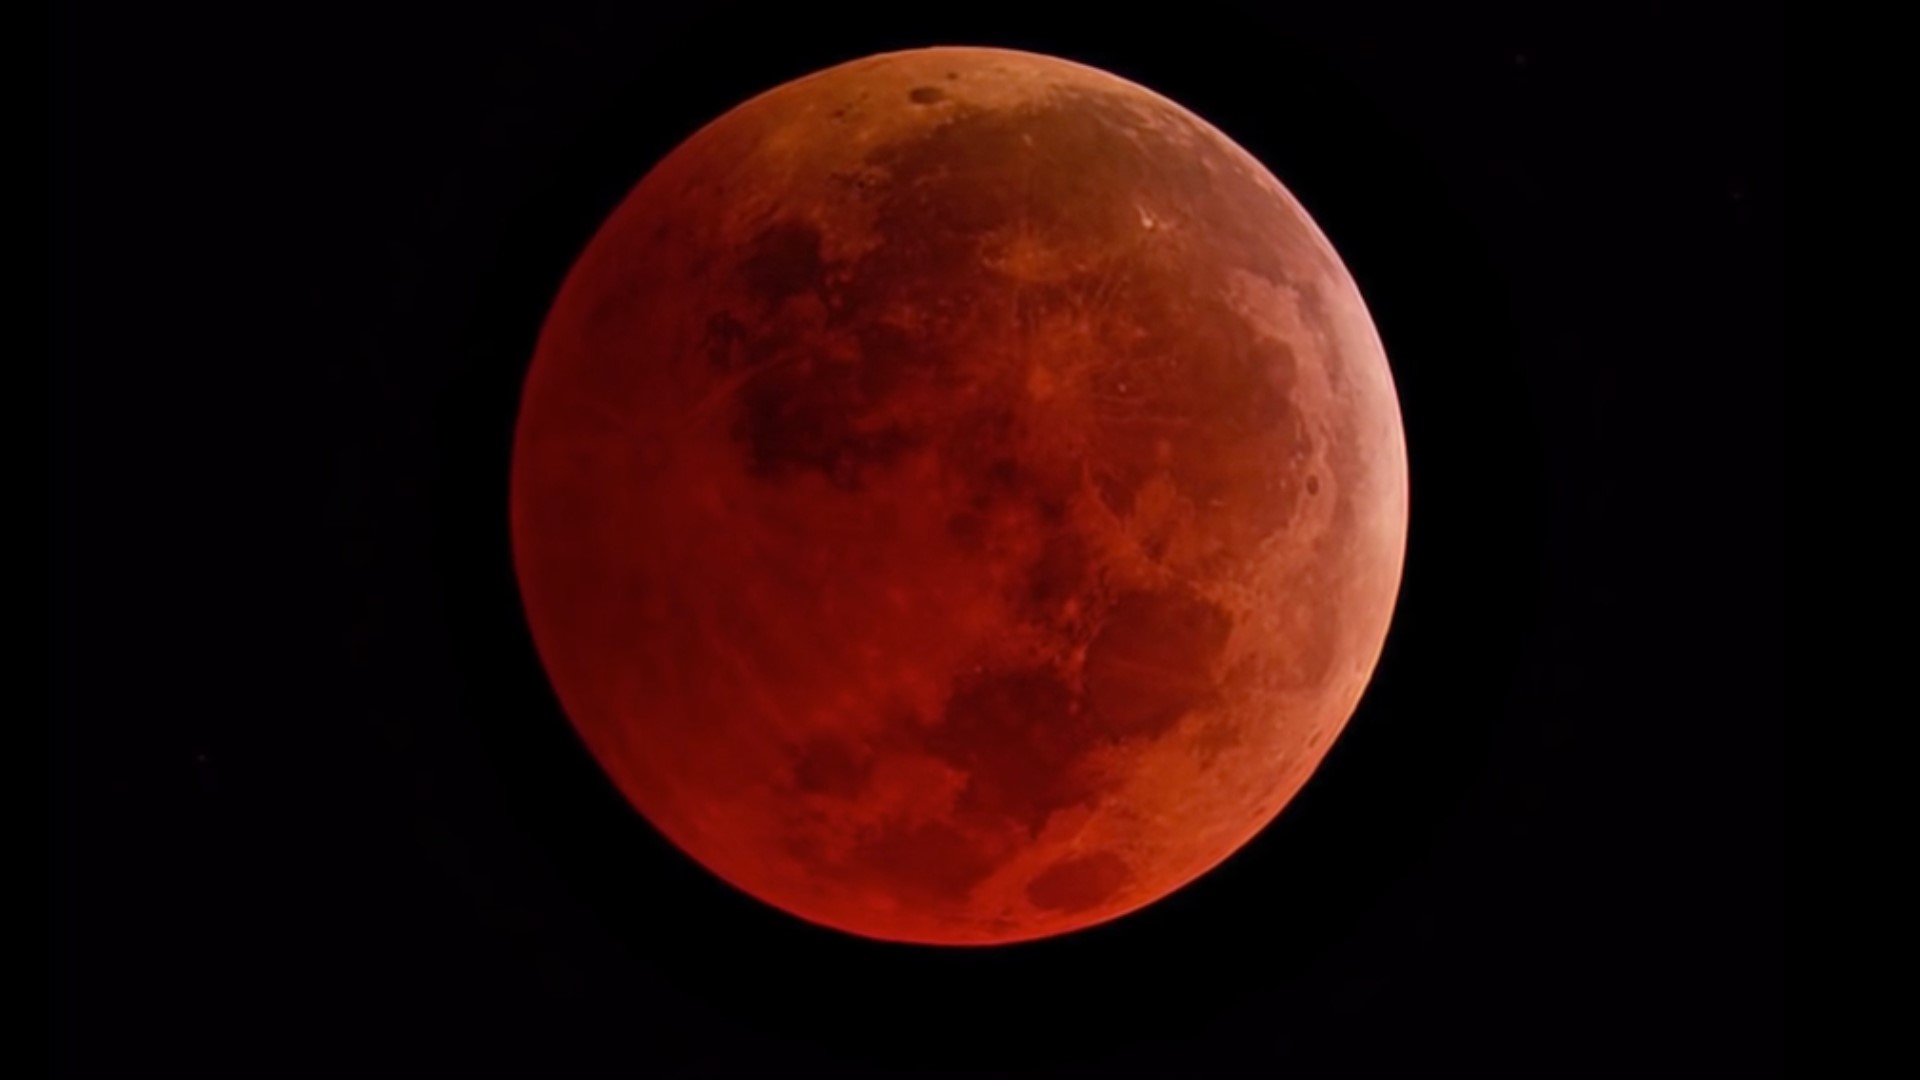 Sunday’s lunar eclipse is also happening on the night of a supermoon, which is why it's called the super wolf blood moon lunar eclipse.